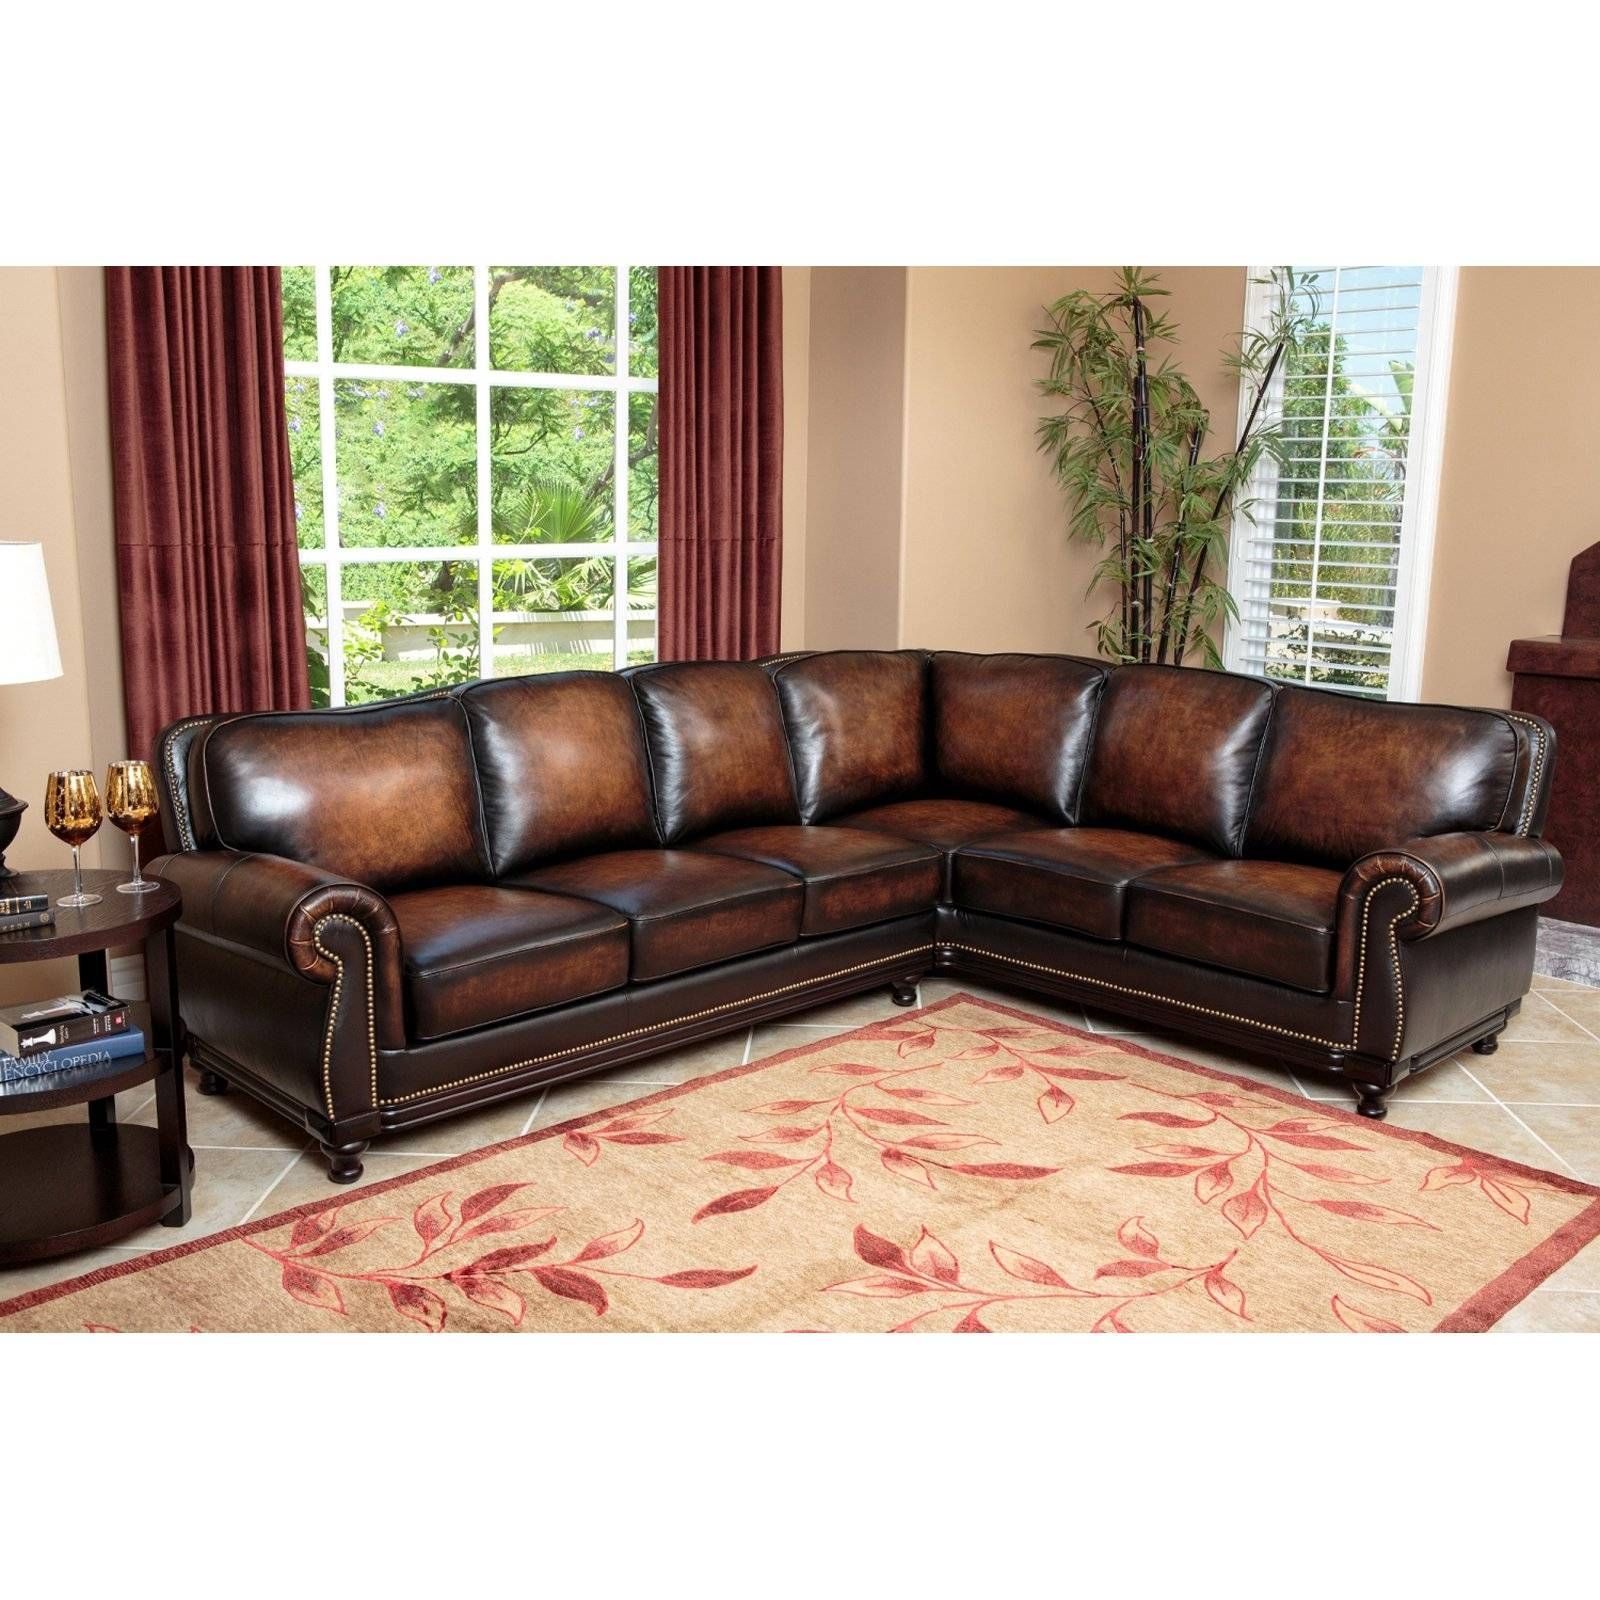 Abbyson Nizza Hand Rubbed Leather Sectional Sofa – Brown | Hayneedle Within Abbyson Sectional Sofa (View 8 of 30)